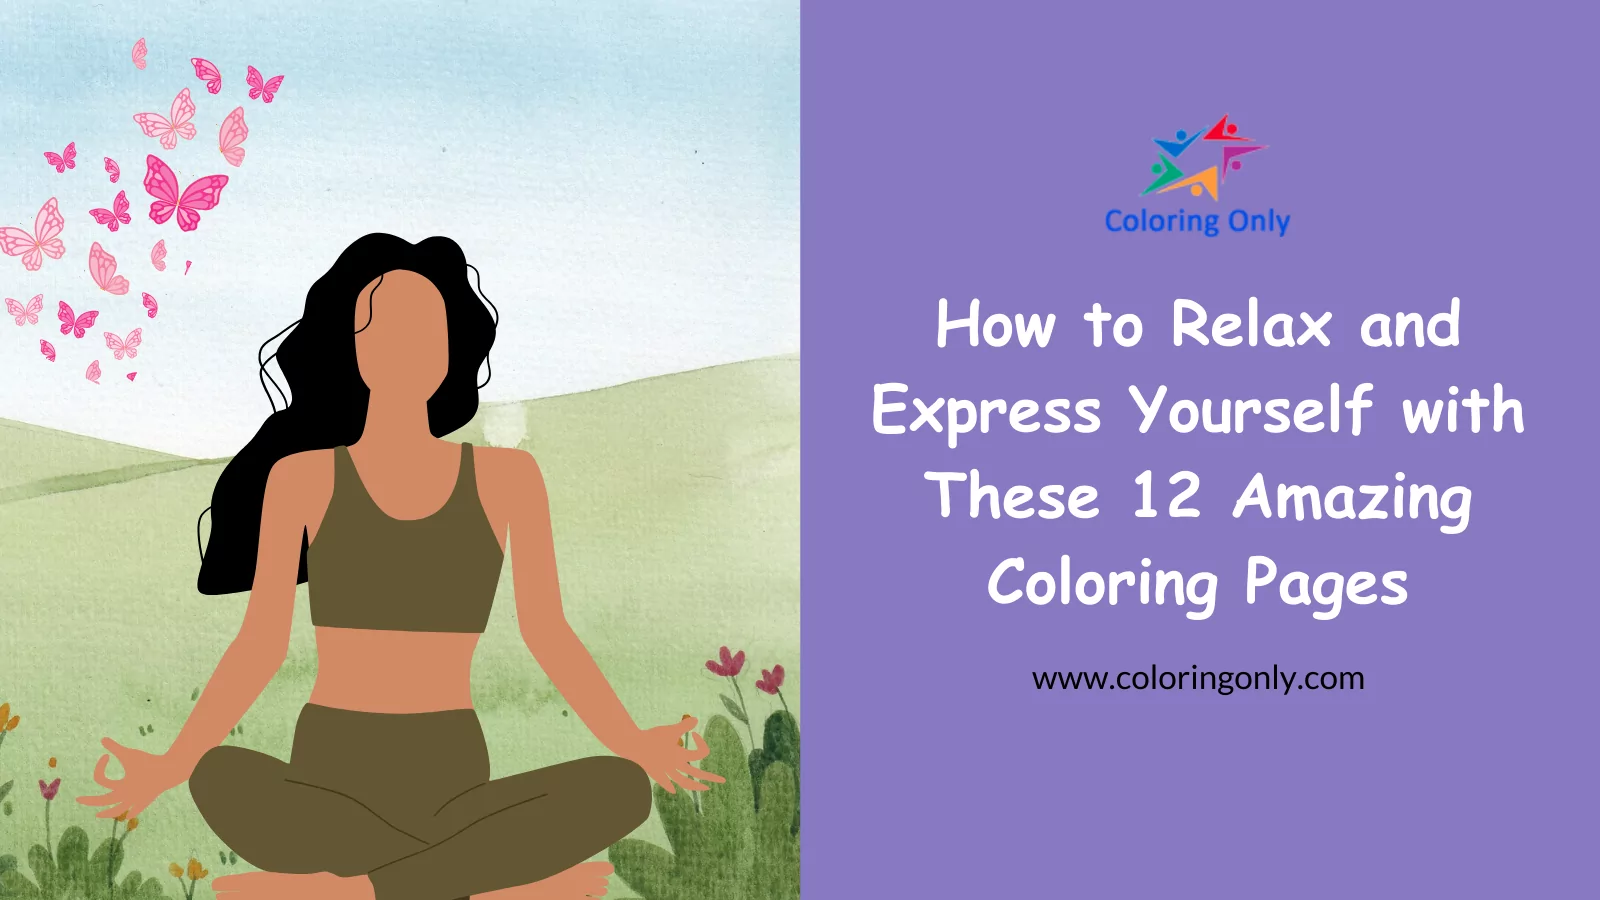 How to Relax and Express Yourself with These 12 Amazing Coloring Pages